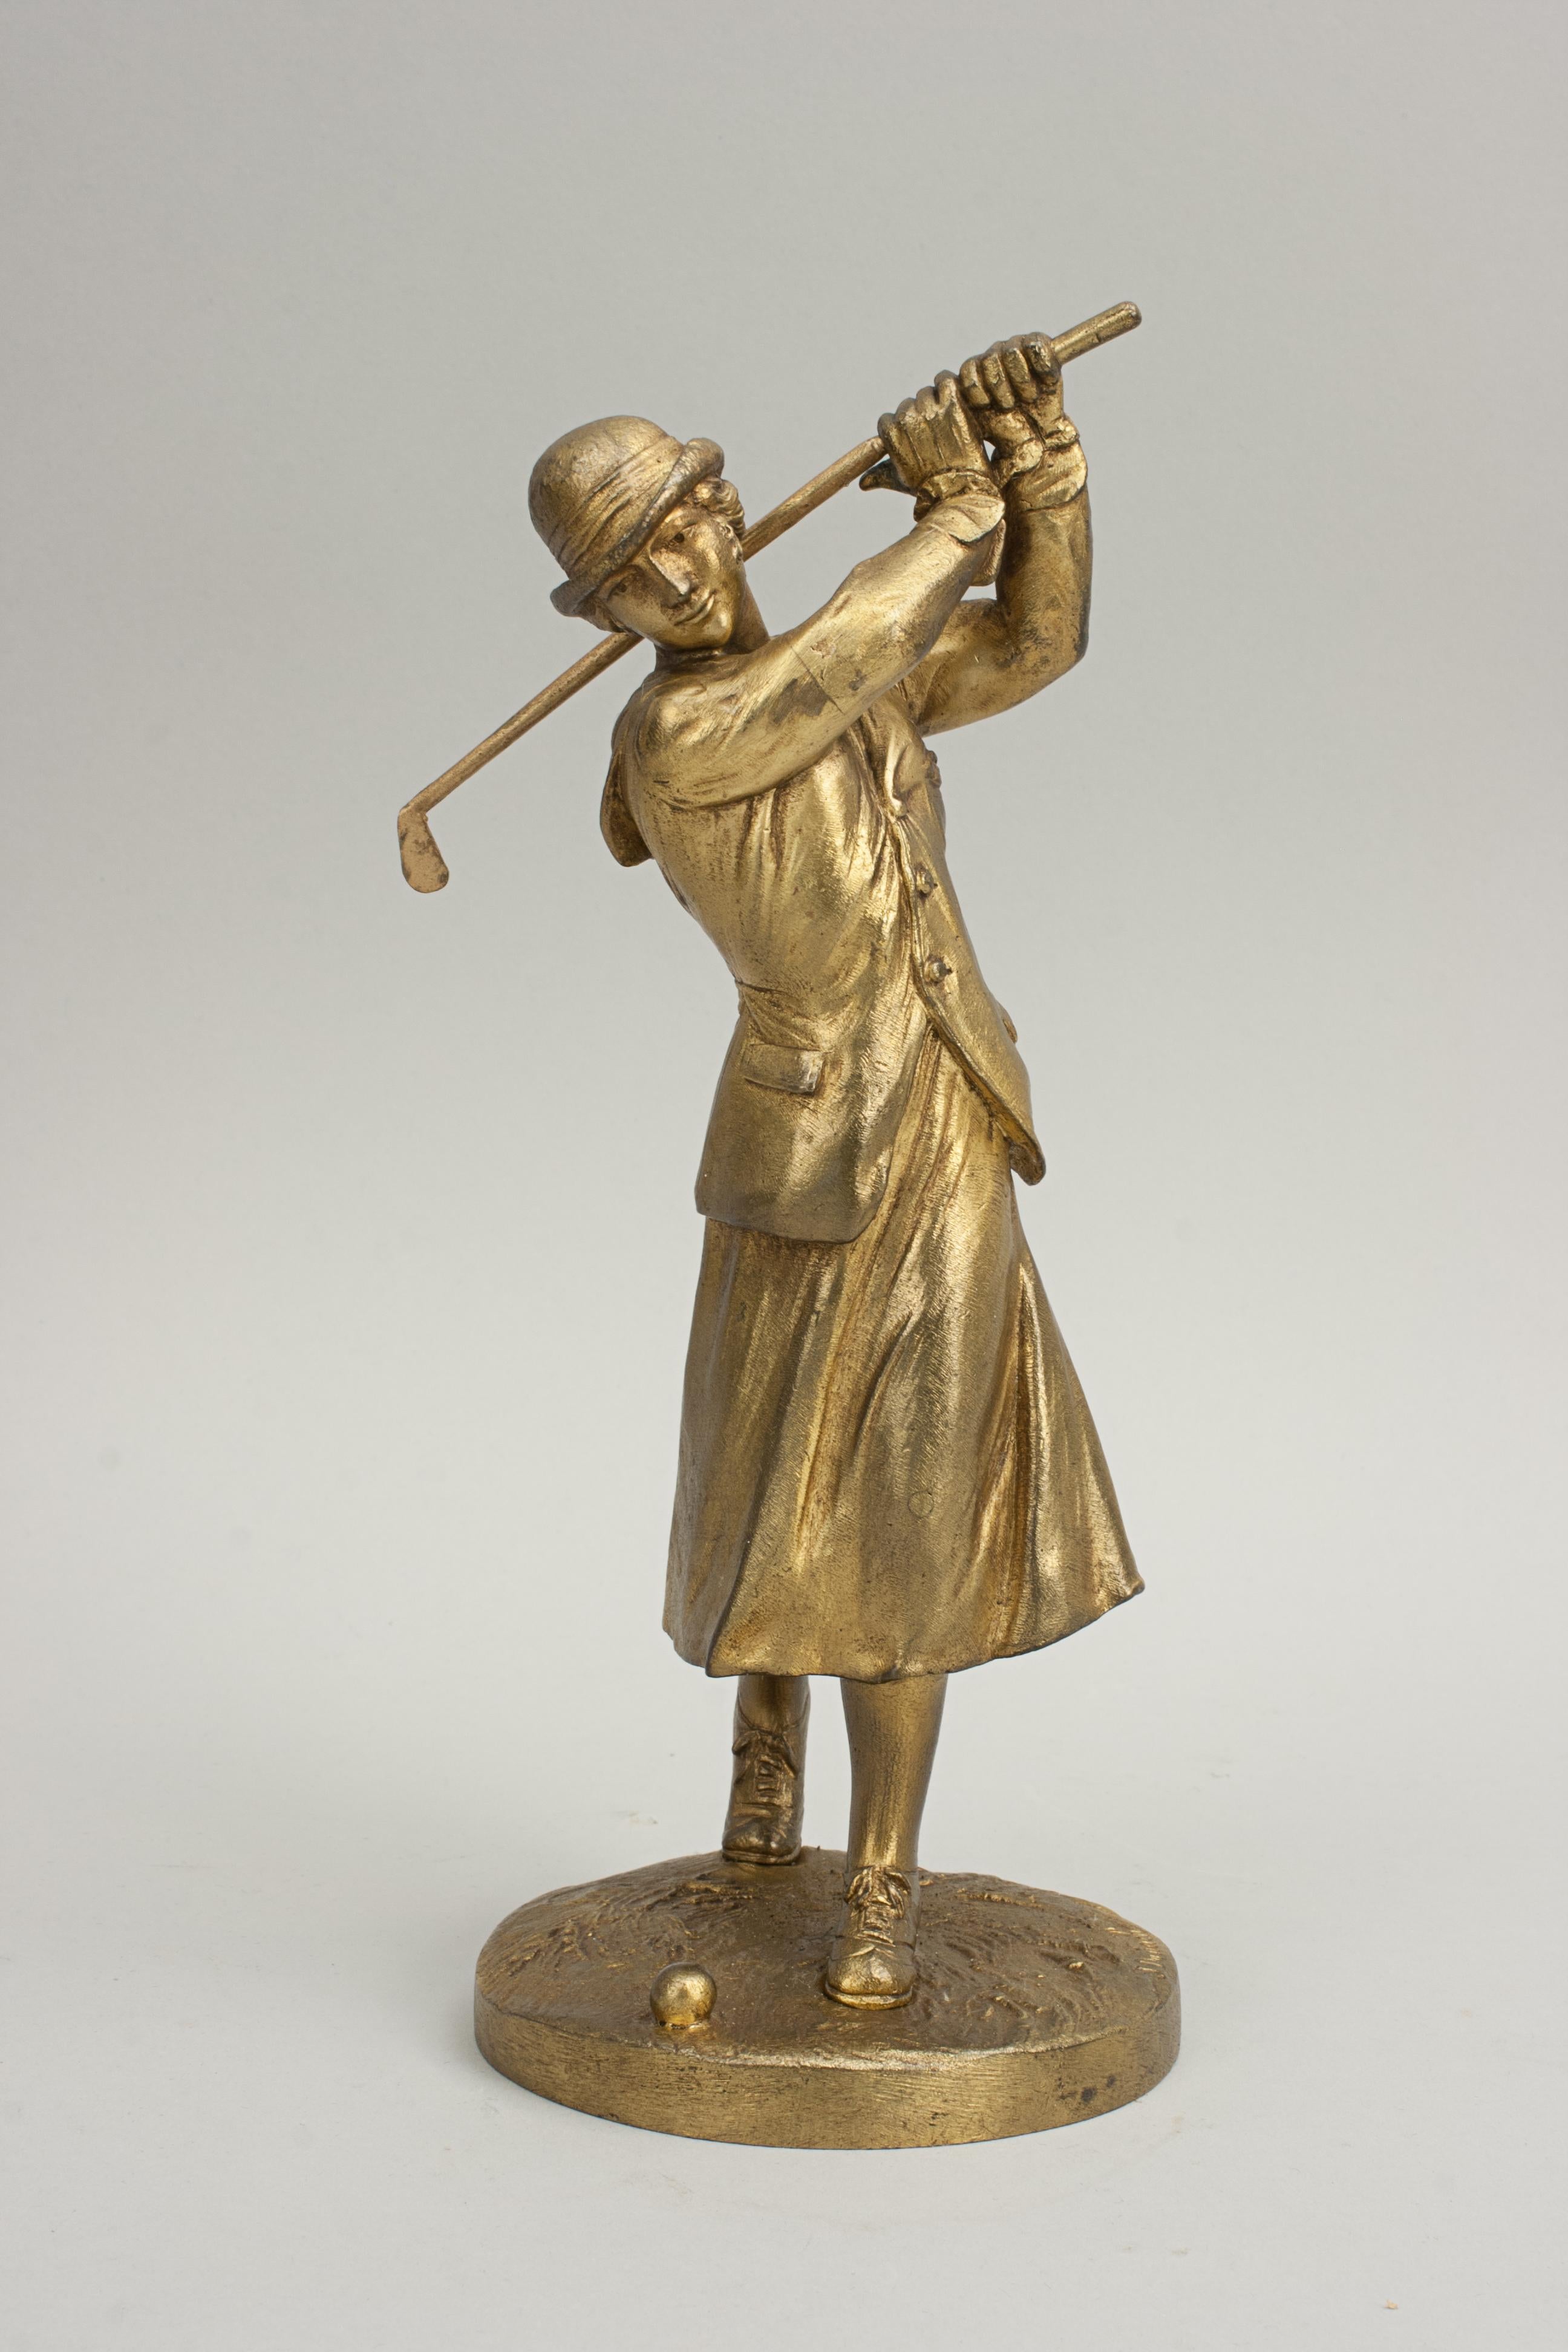 Vintage Jose Dunach Bronze Lady Golf Figure.
A very nice French Art Deco style sculpture of a lady golfer mounted on a round naturalistic base, the golfer is in a full follow through position. This bronze statue has a gilt finish with a wonderful